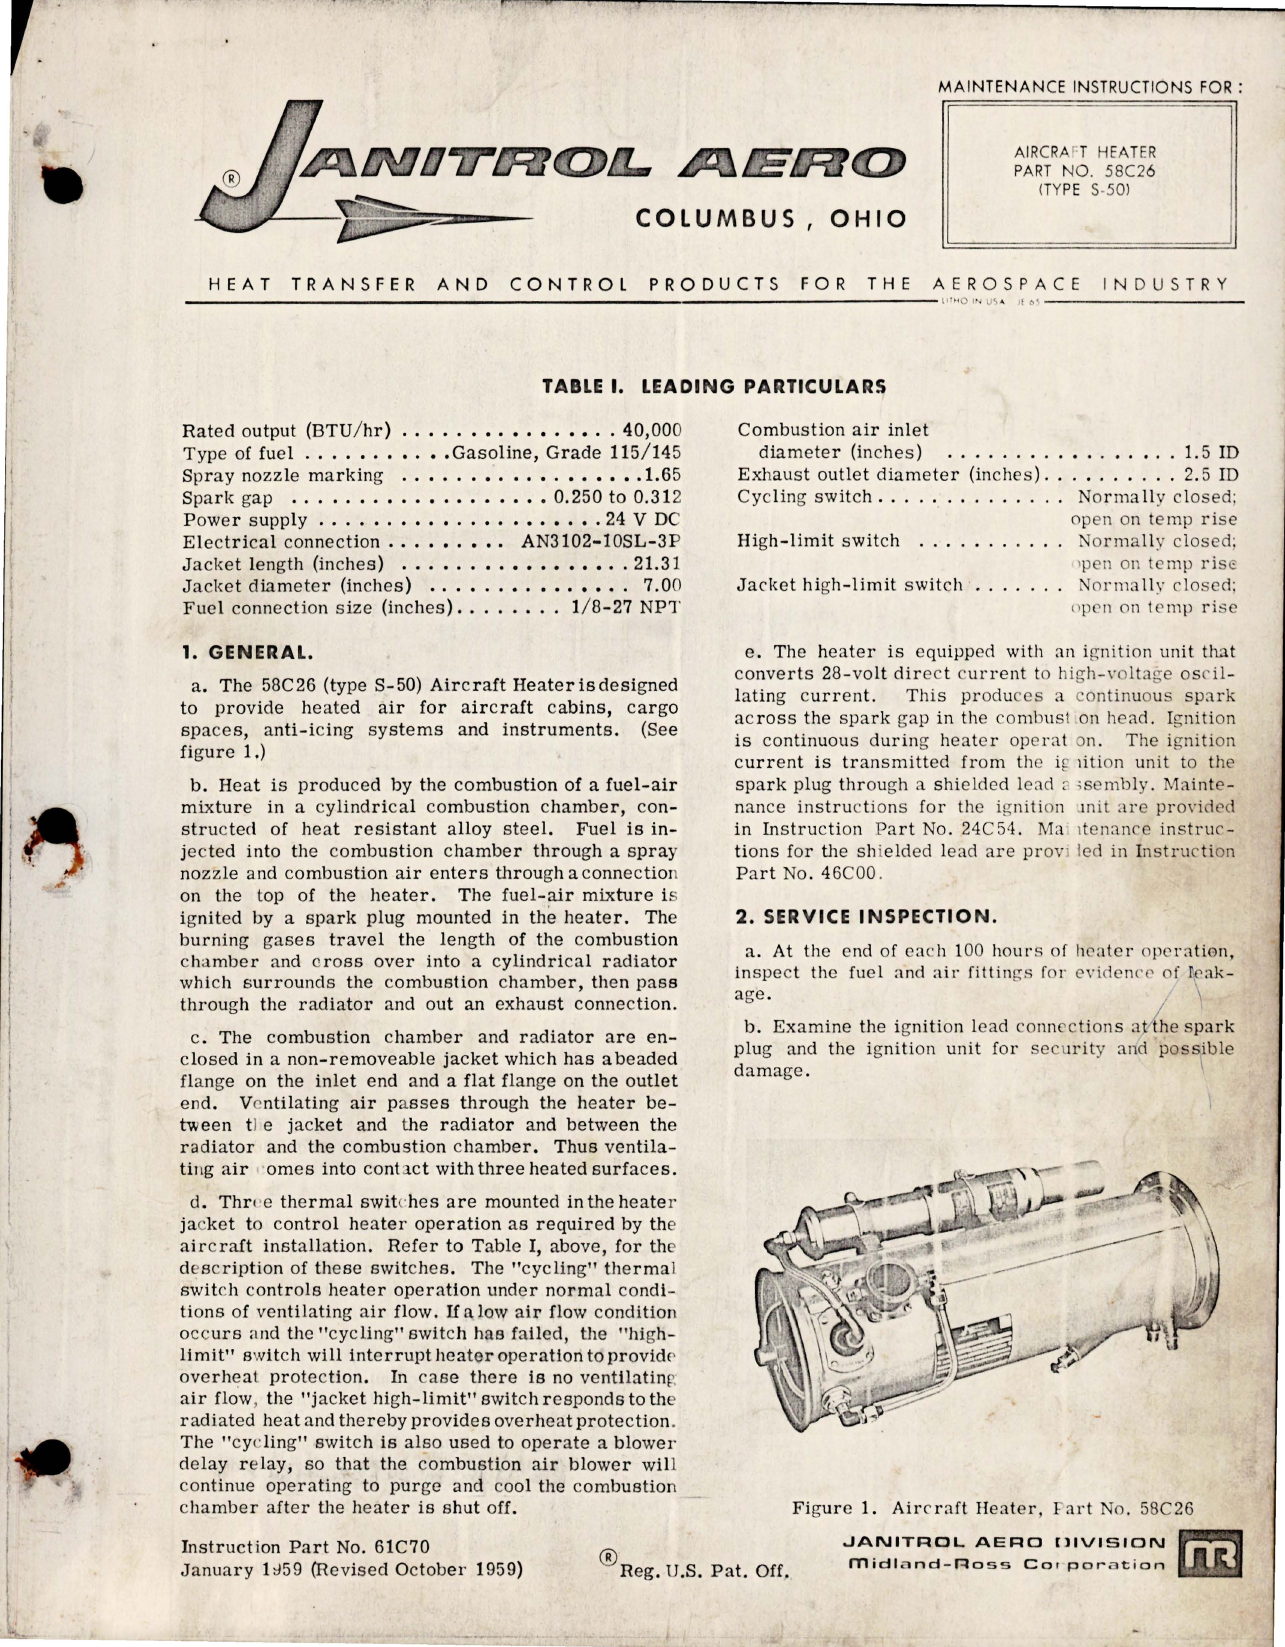 Sample page 1 from AirCorps Library document: Maintenance Instructions for Aircraft Heater - Part 58C26 - Type S-50 